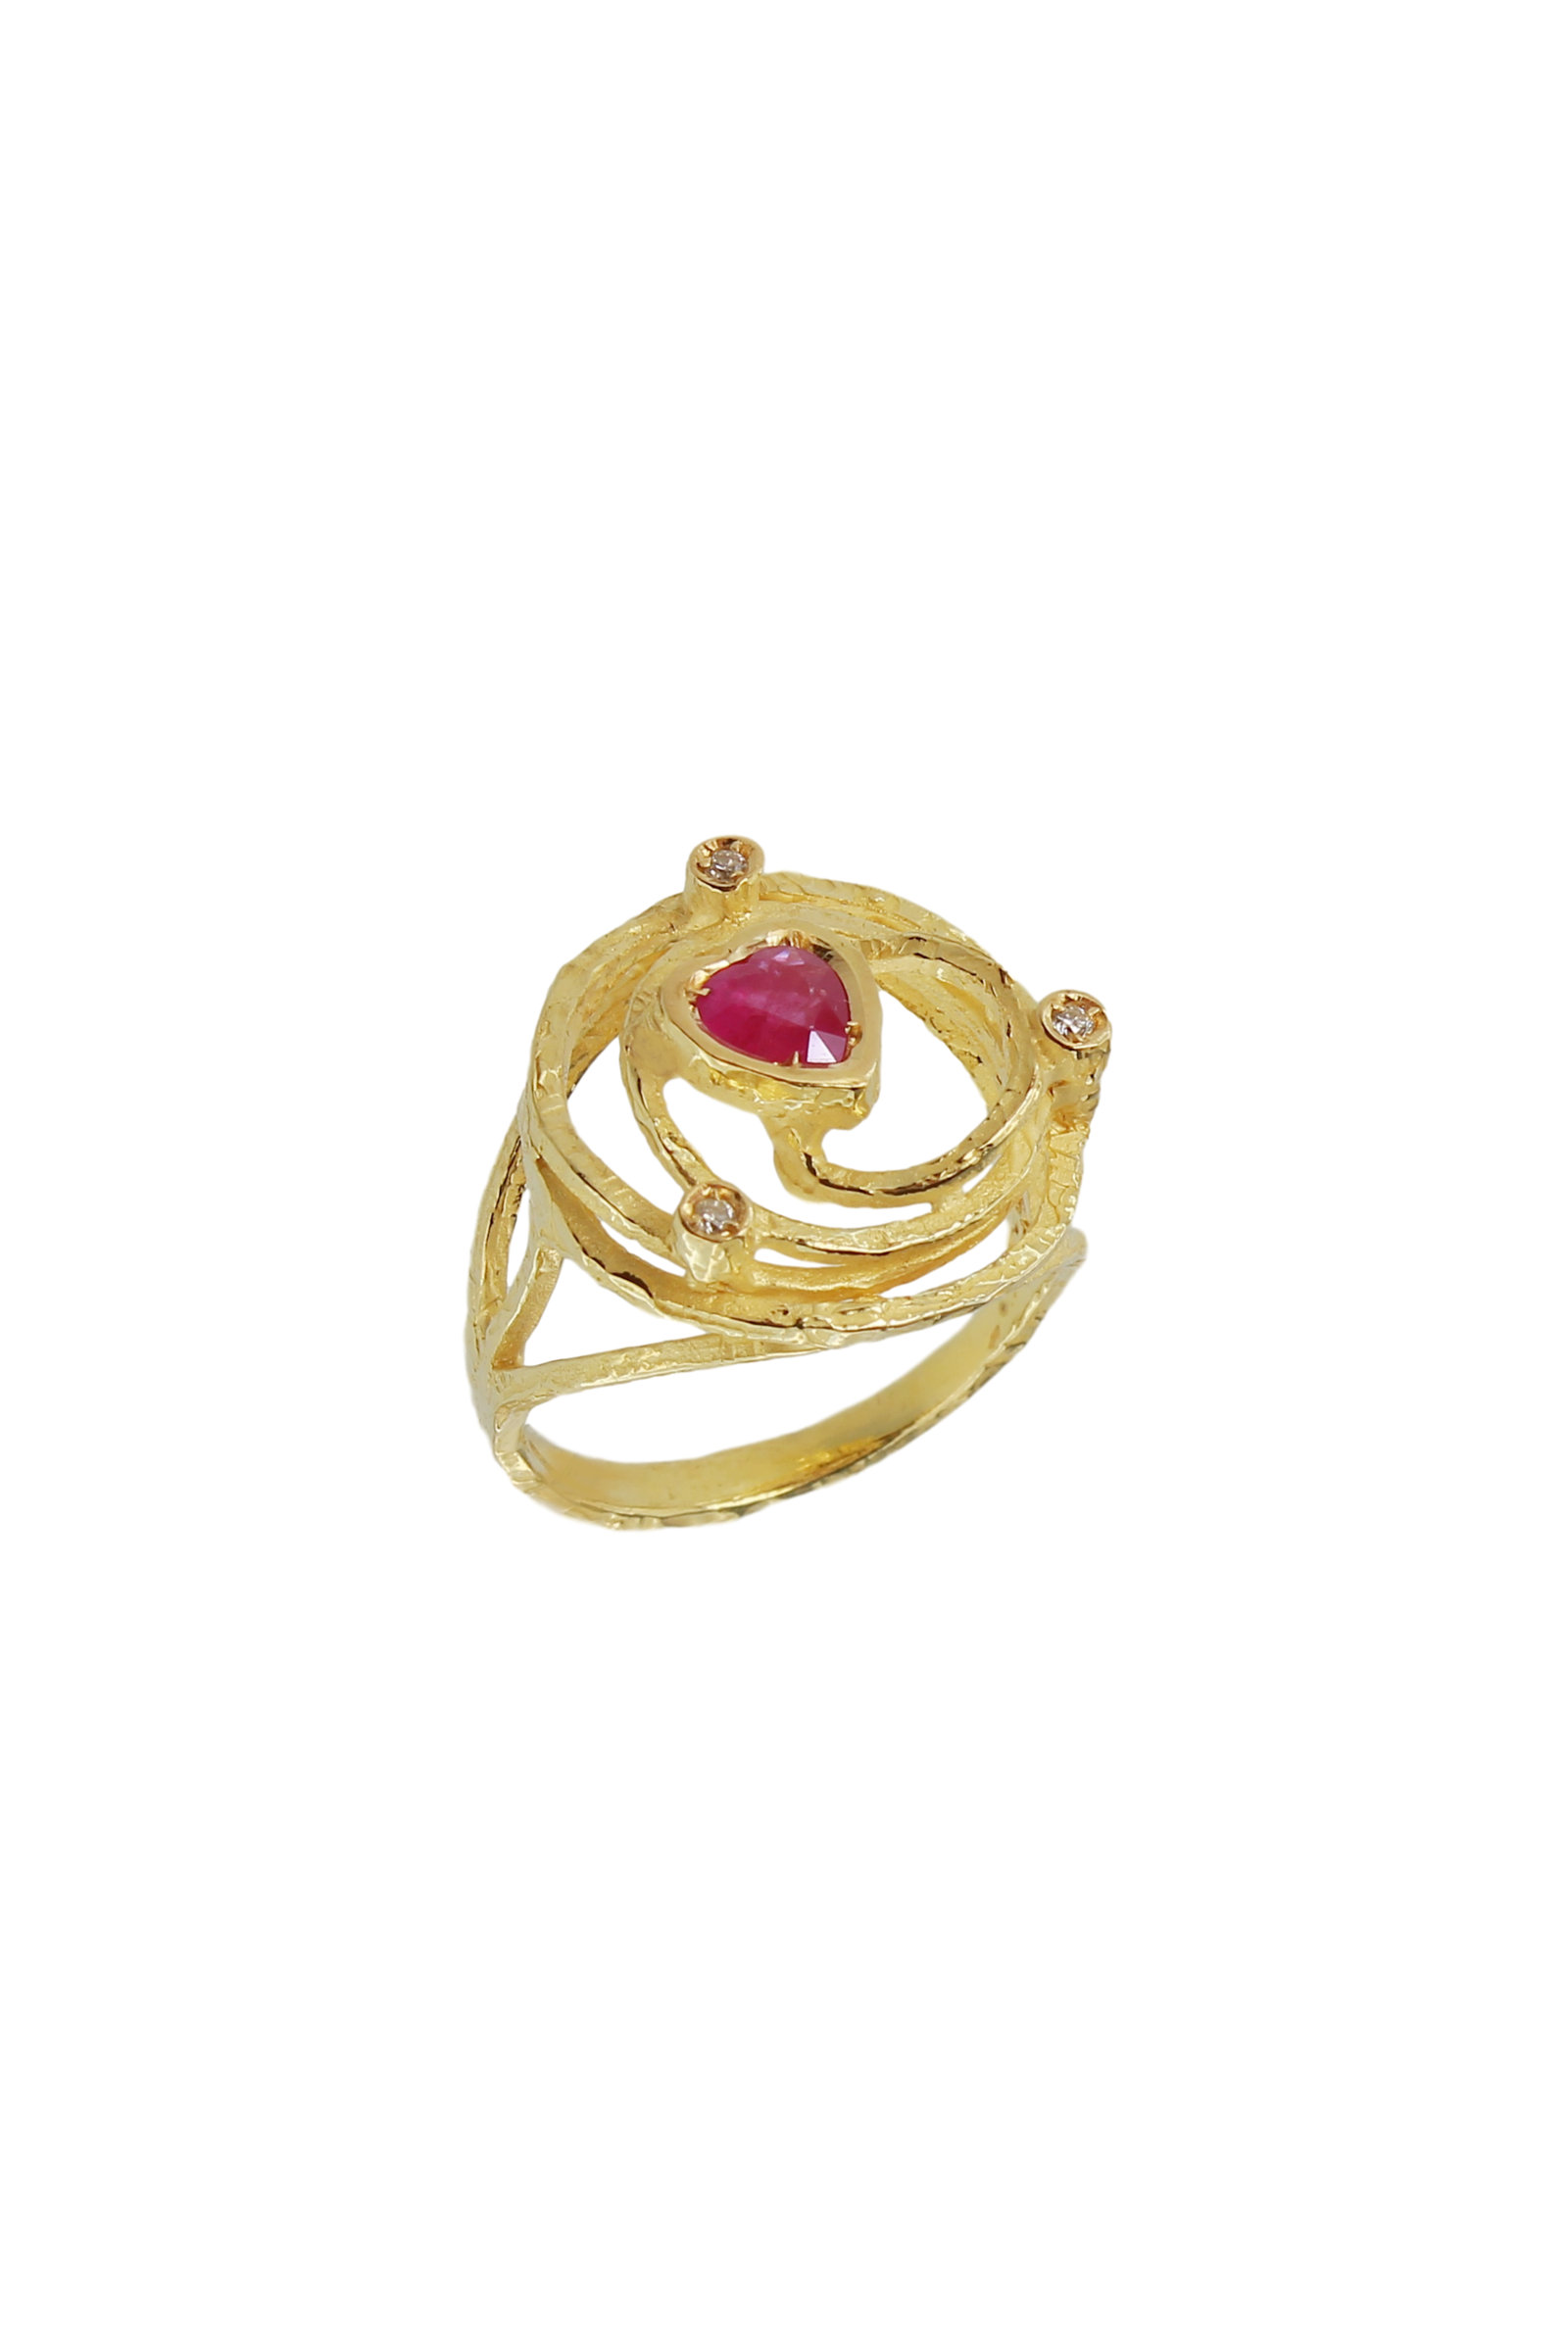 SE304CRU-18-Kt-Yellow-Gold-Orbit-Ring-with-Diamonds-and-Heart-Ruby-1